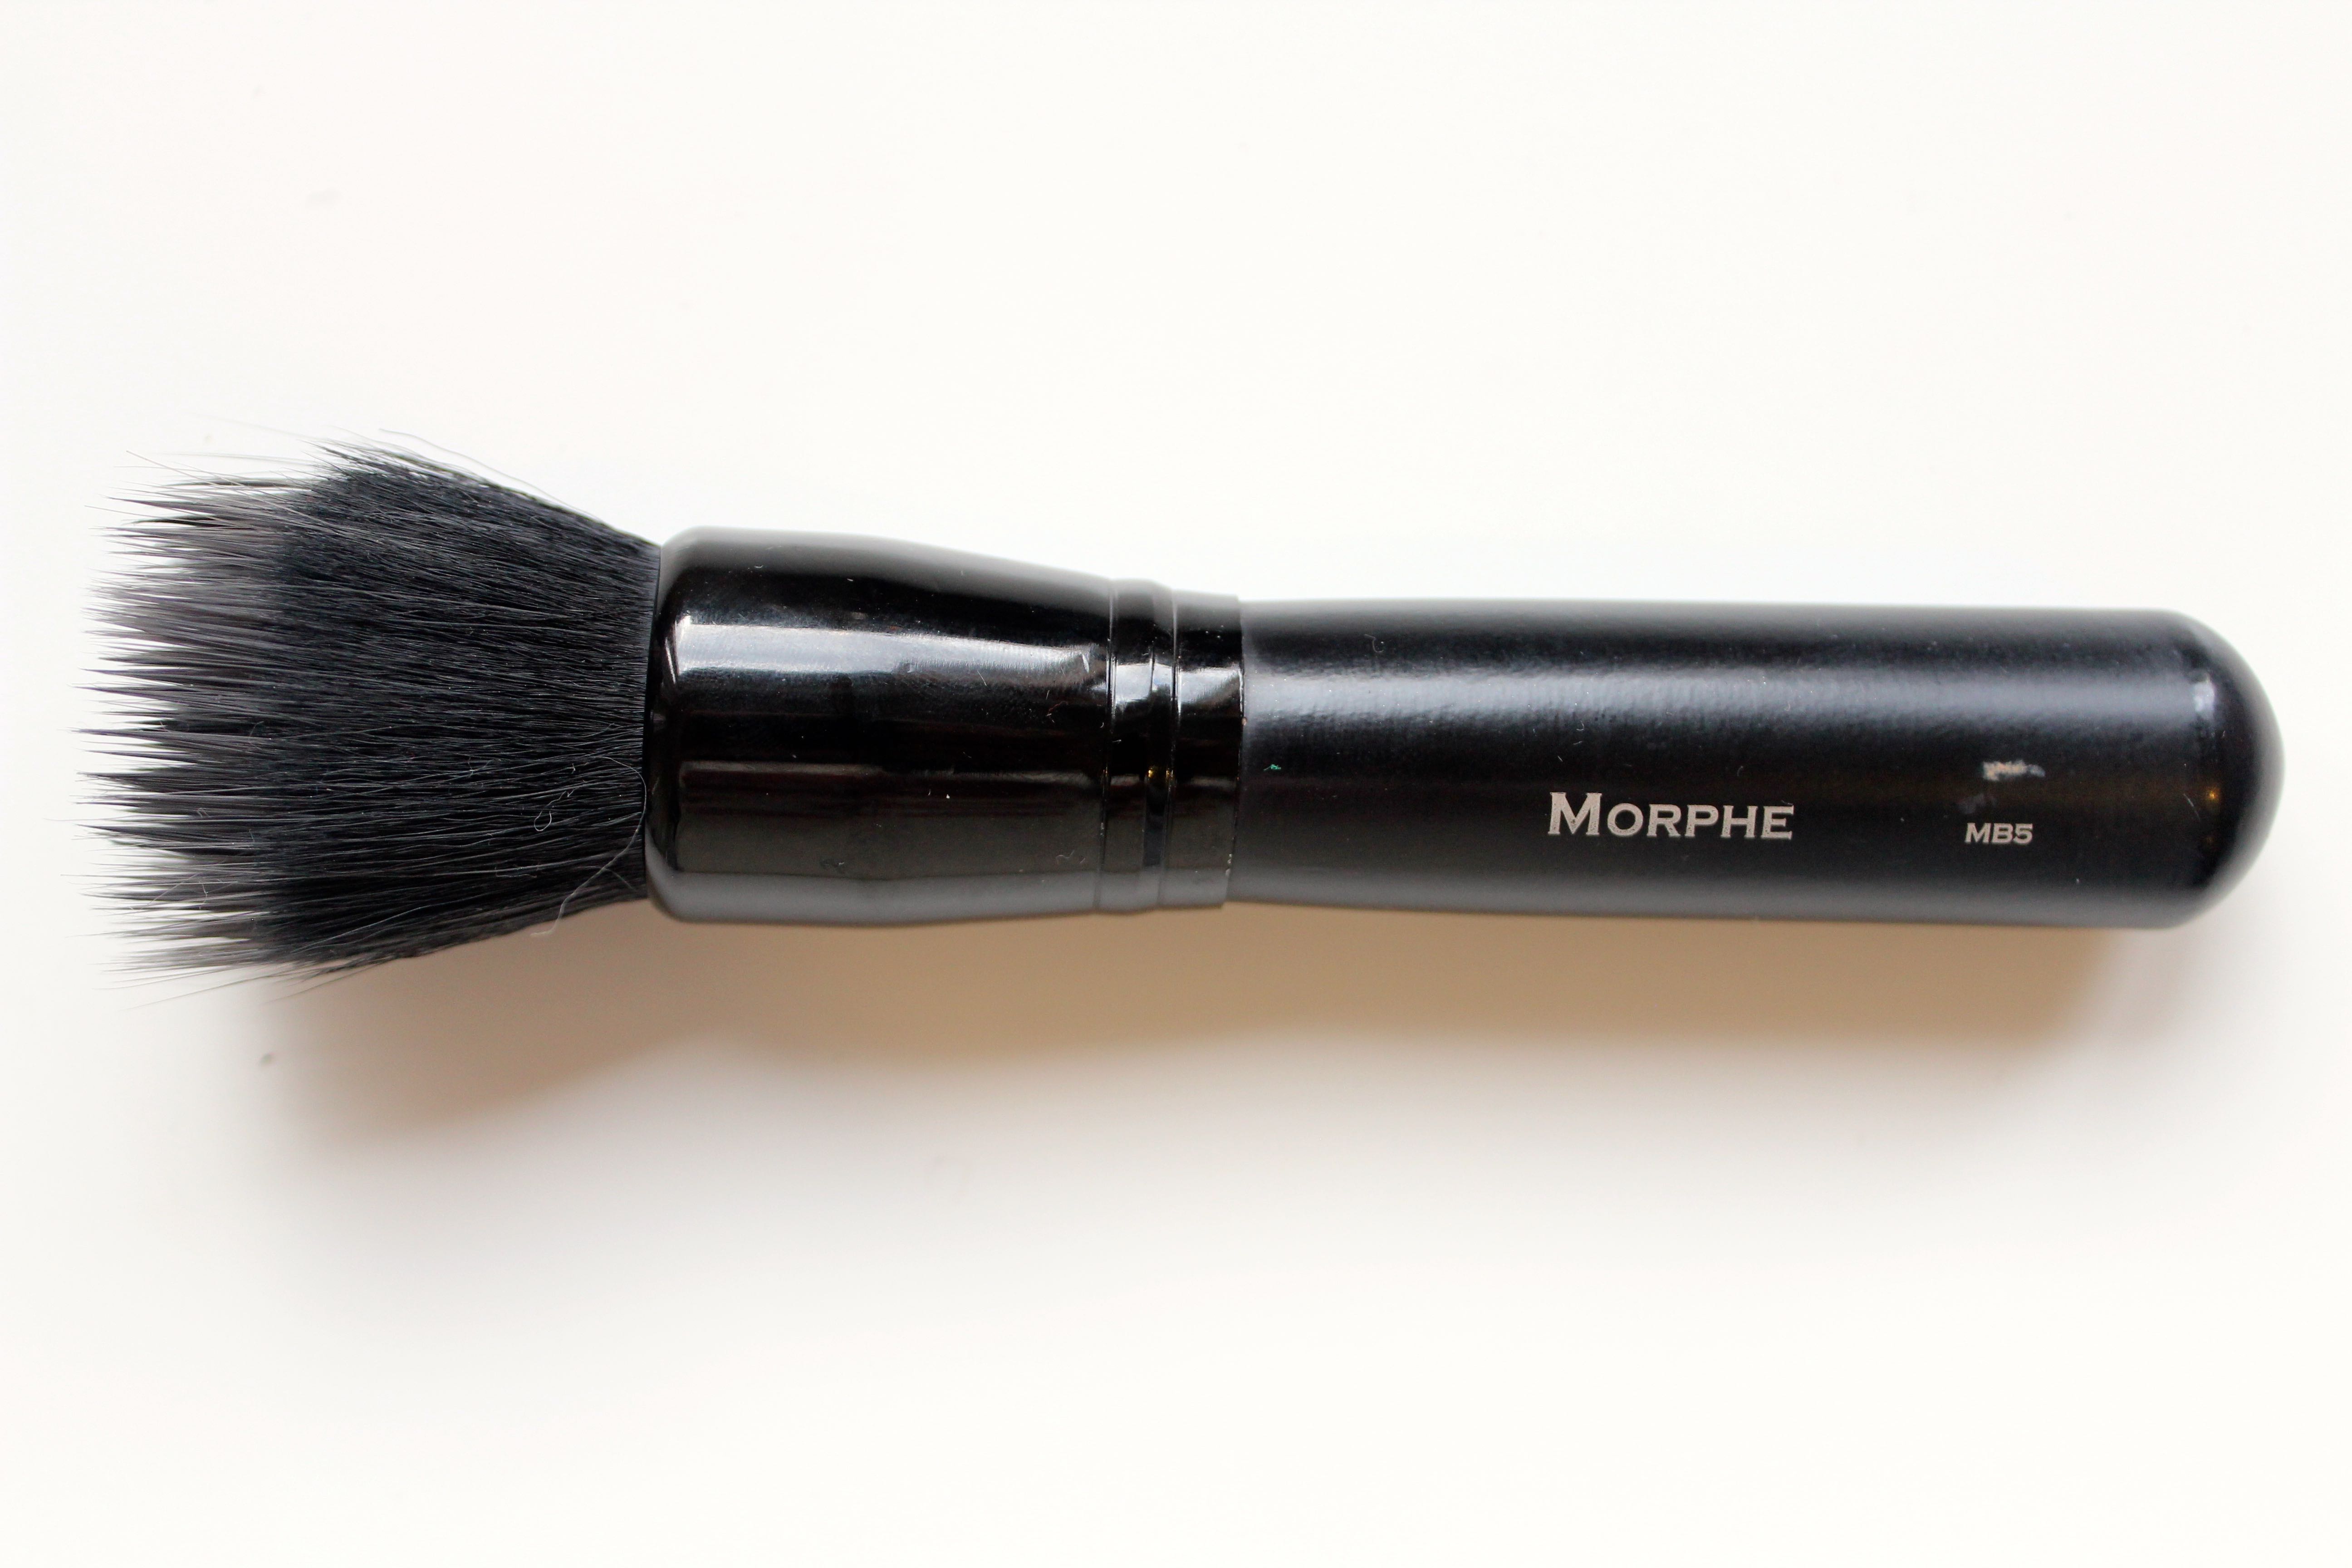 Morphe MB5 Deluxe Duo Foundation review by facemadeup.com